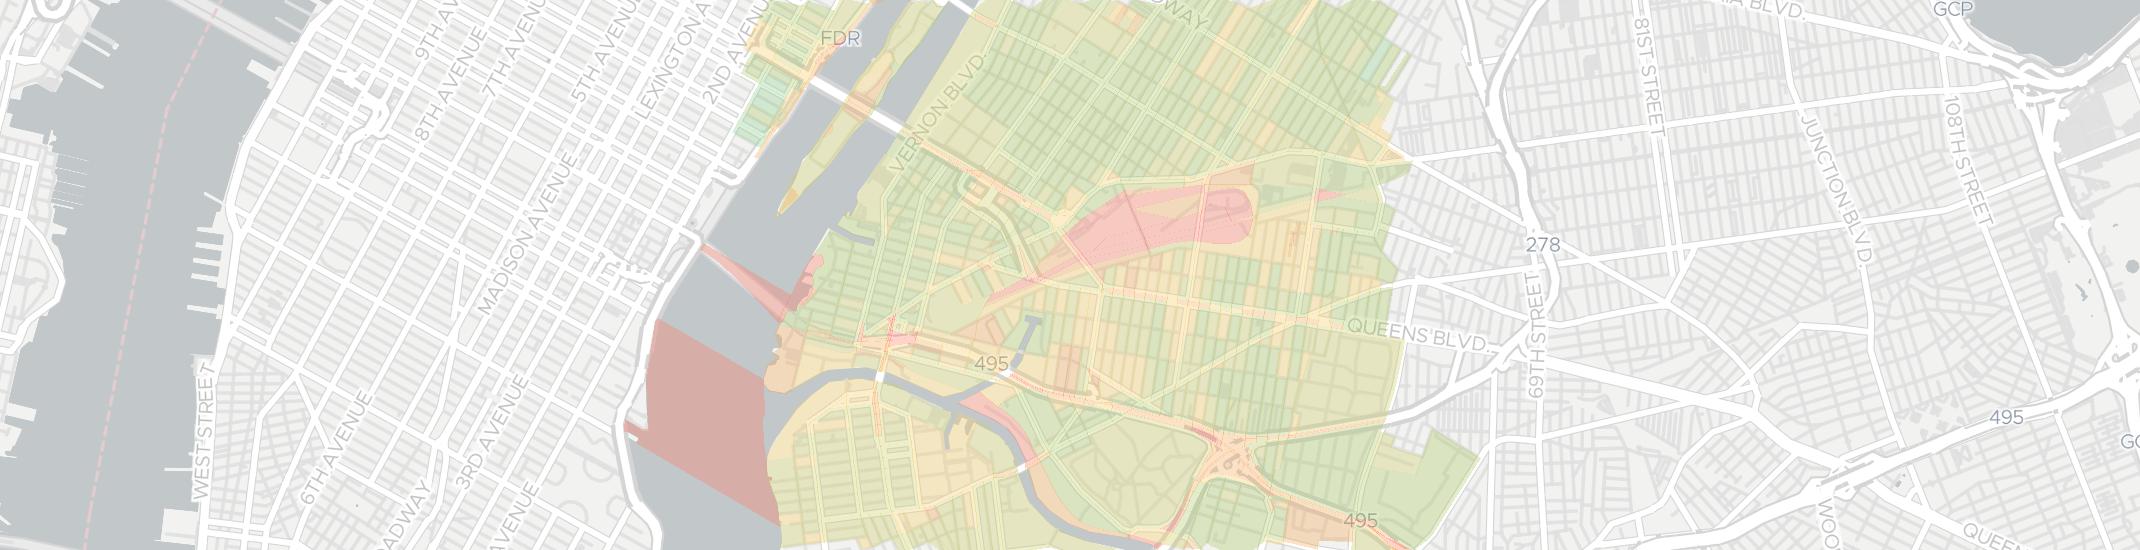 Long Island City Internet Competition Map. Click for interactive map.